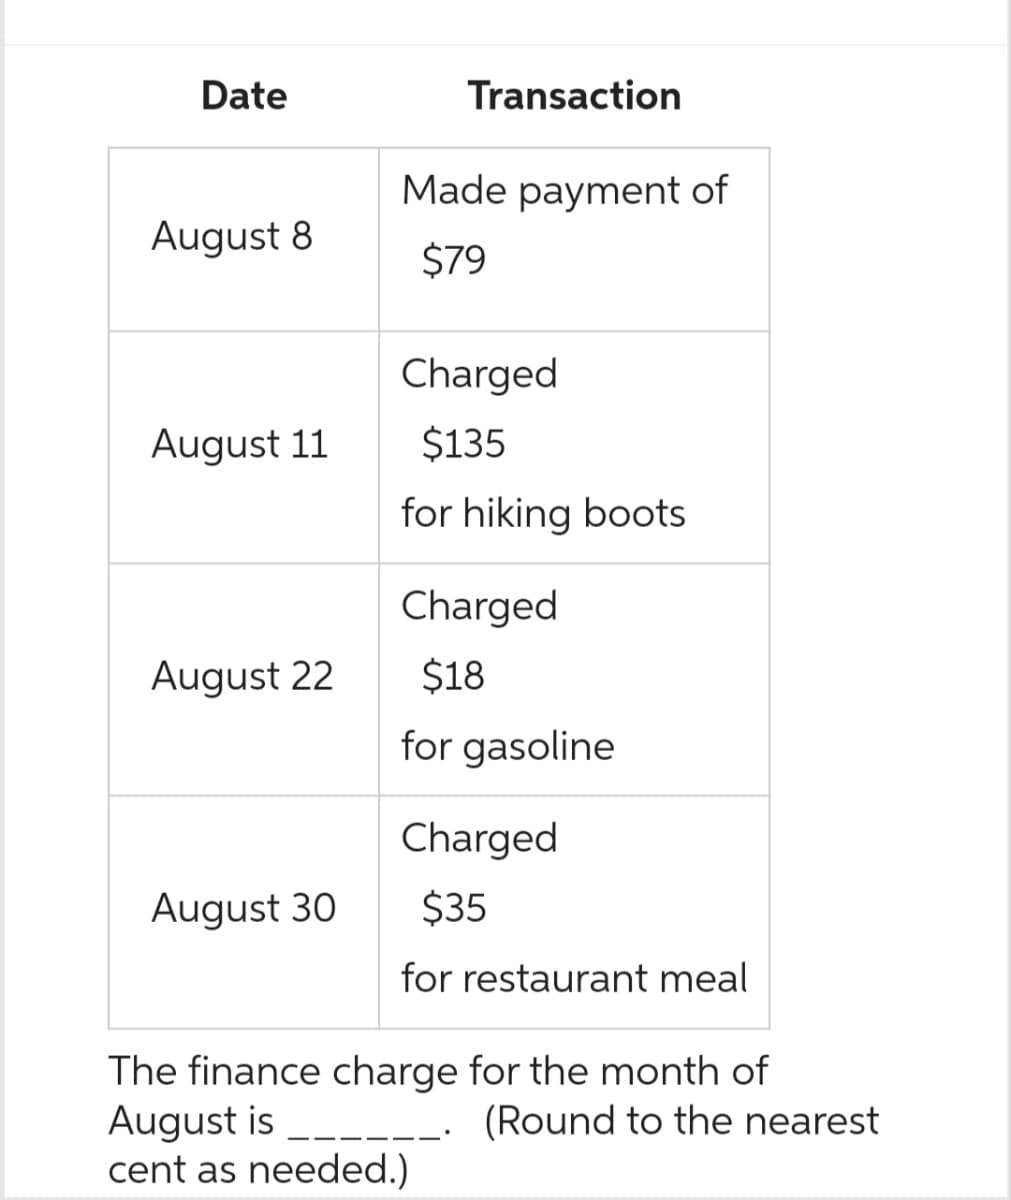 Date
August 8
August 11
August 22
August 30
Transaction
Made payment of
$79
Charged
$135
for hiking boots
Charged
$18
for gasoline
Charged
$35
for restaurant meal
The finance charge for the month of
August is __________. (Round to the nearest
cent as needed.)